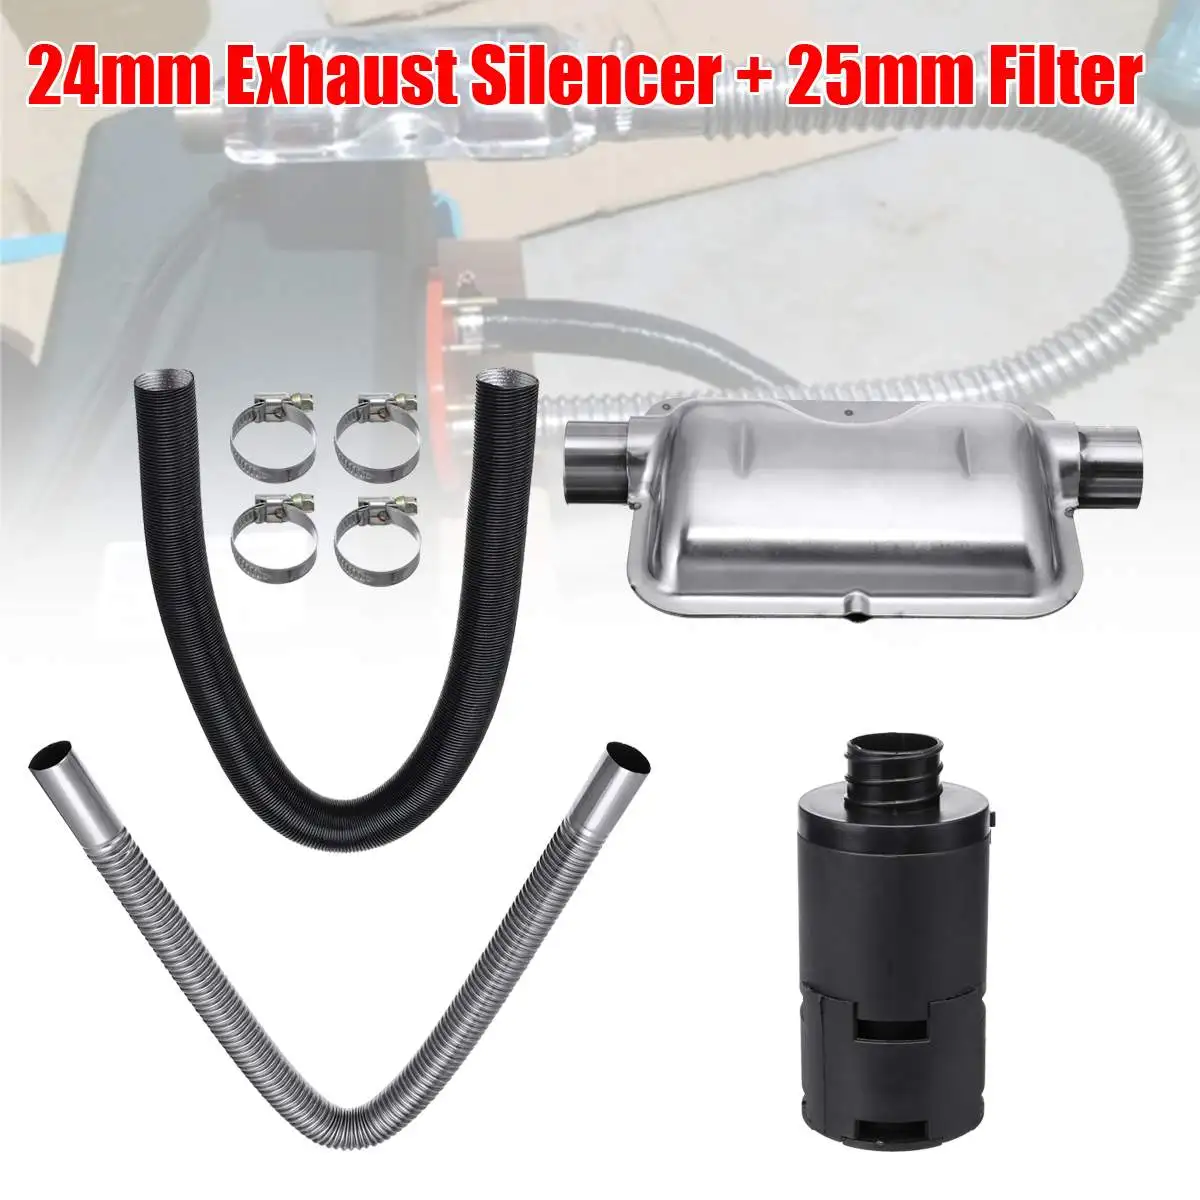 Car Parking Heater Accessories 24mm Exhaust Silencer+ 25mm Filter Accessory For Air Diesels Heater